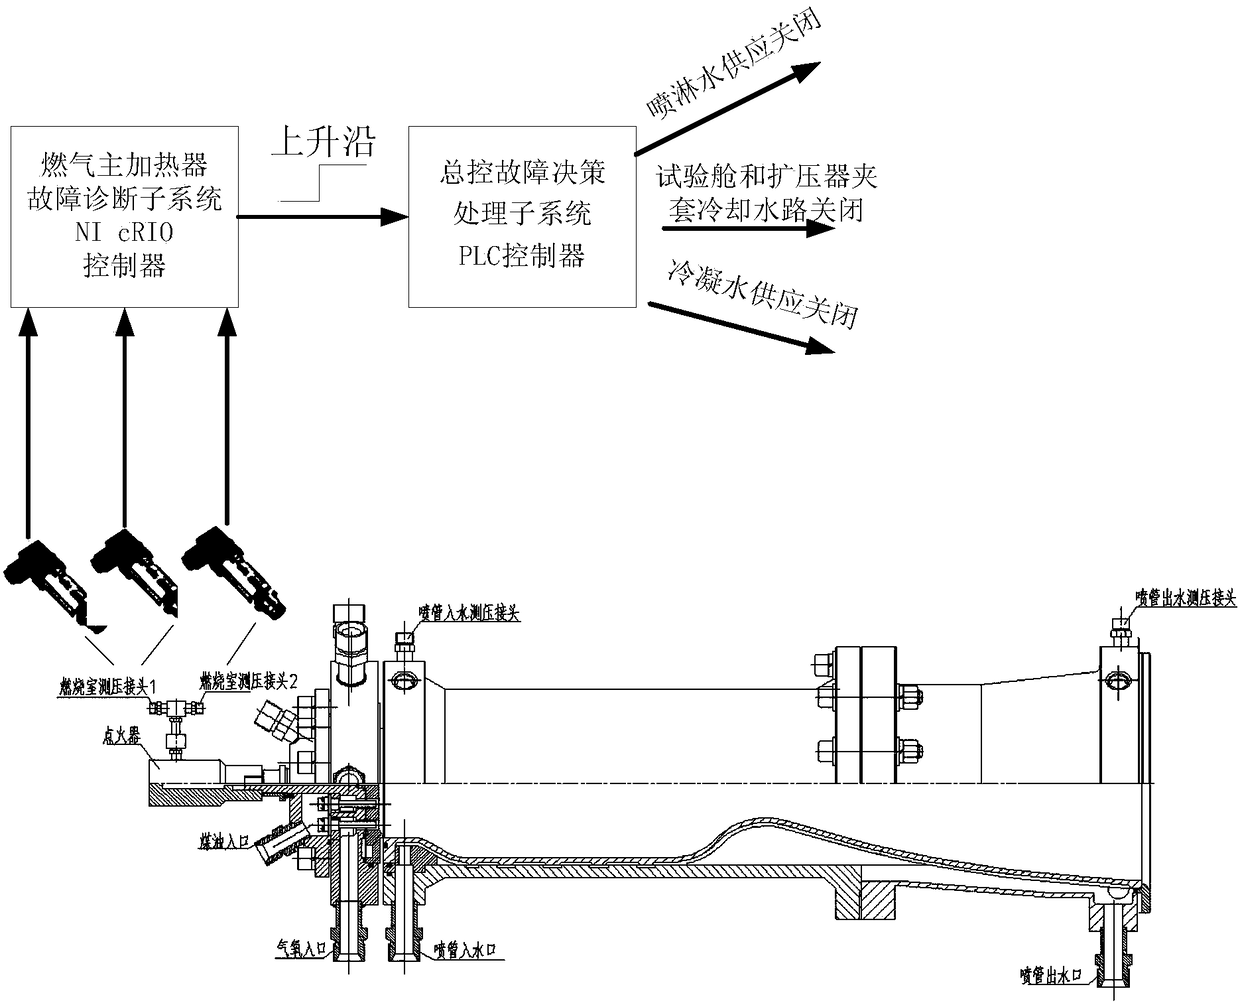 Wind tunnel operation fault diagnosis system based on distributed architecture